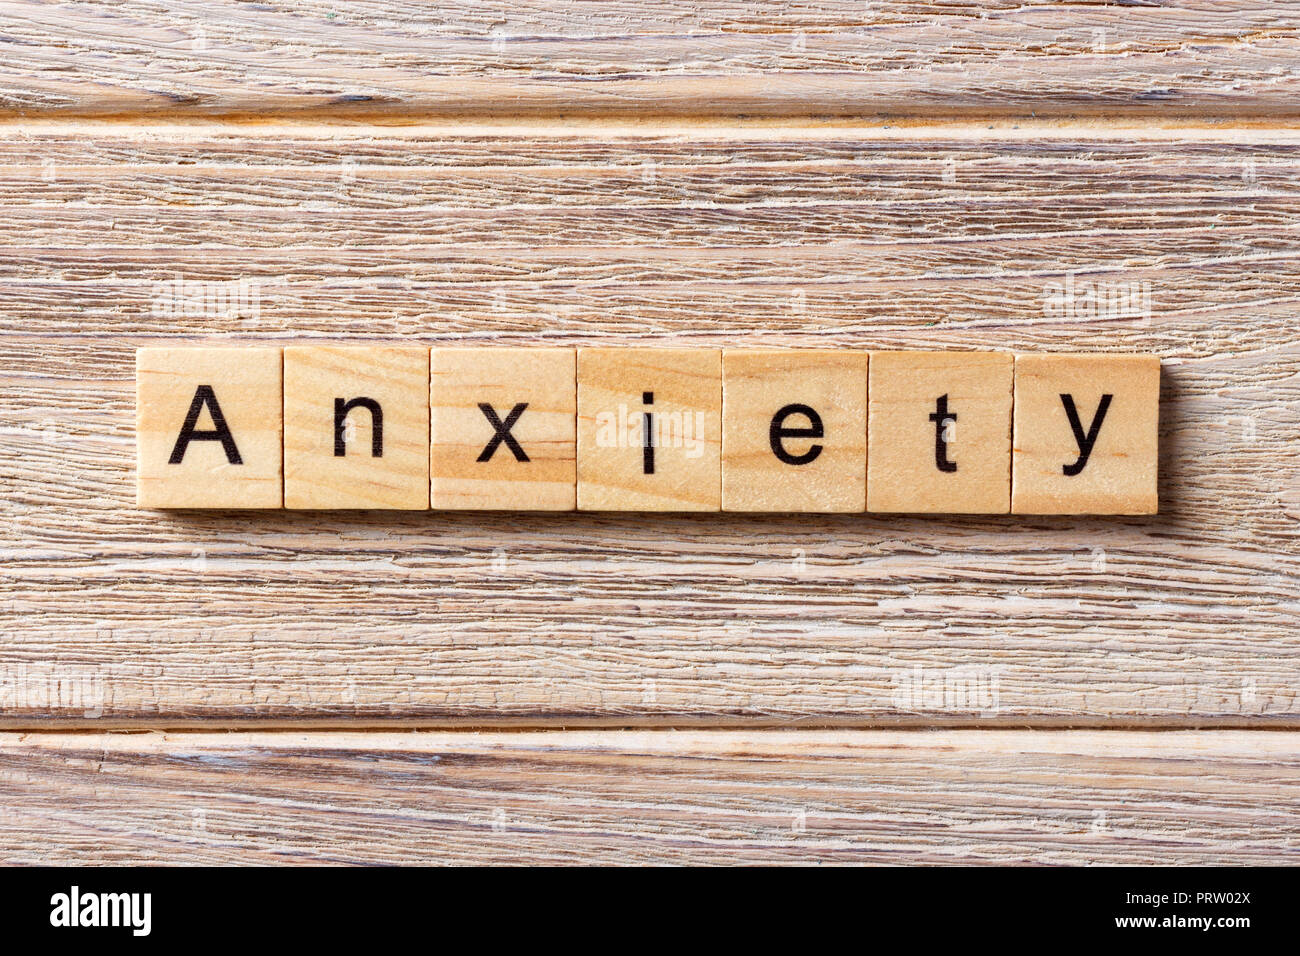 ANXIETY word written on wood block. ANXIETY text on table, concept. Stock Photo